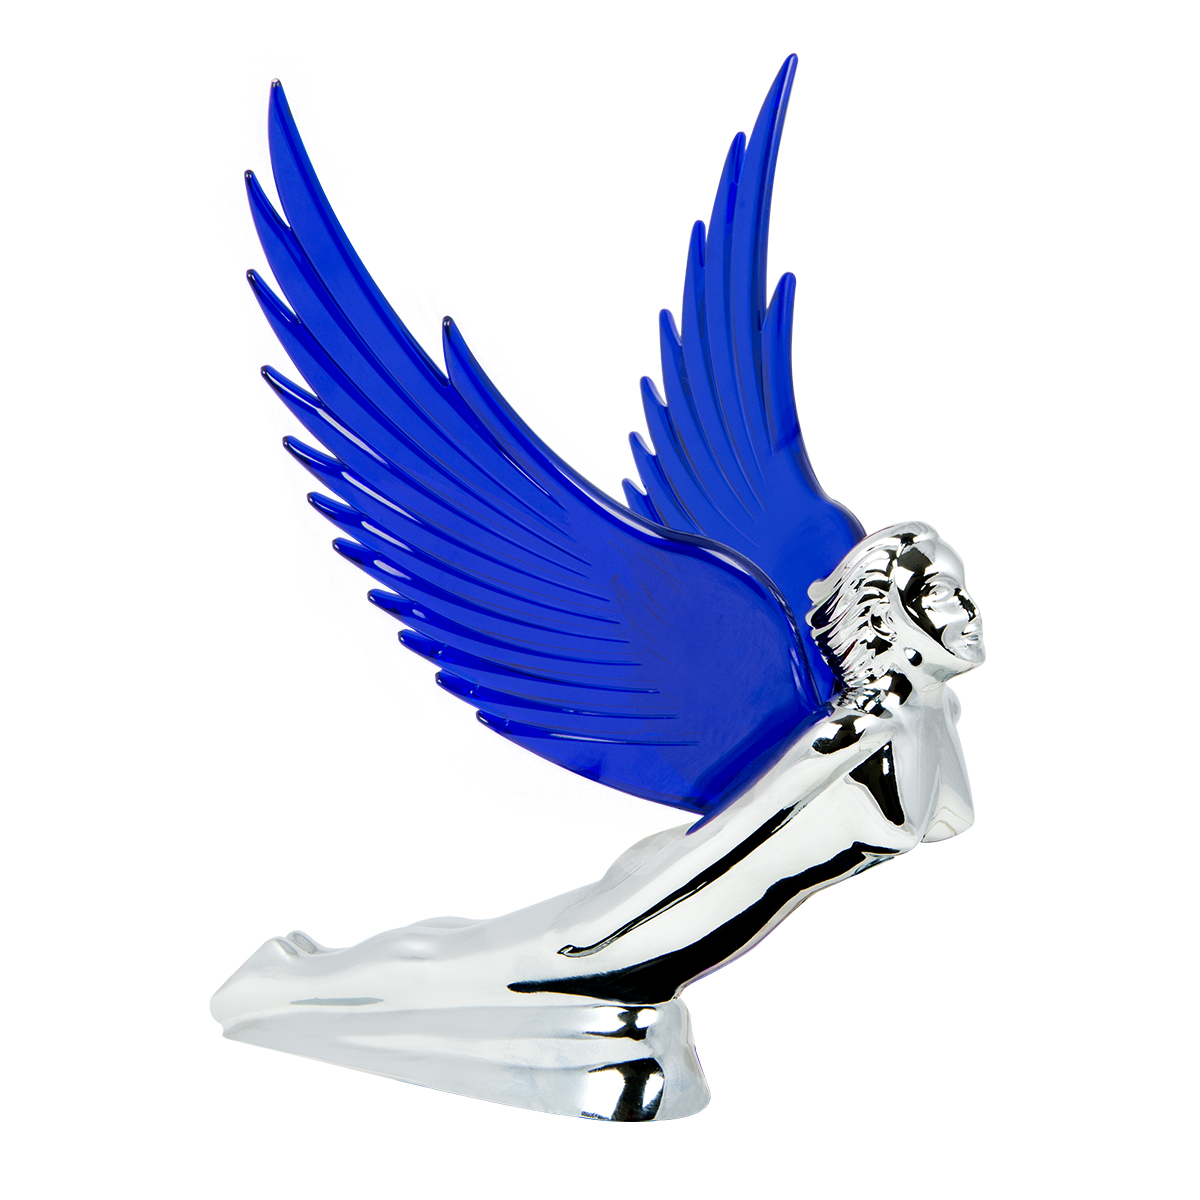 Flying Pig Mascot with Red Illuminated Wings-Chrome Plated TRUCK Mascot 